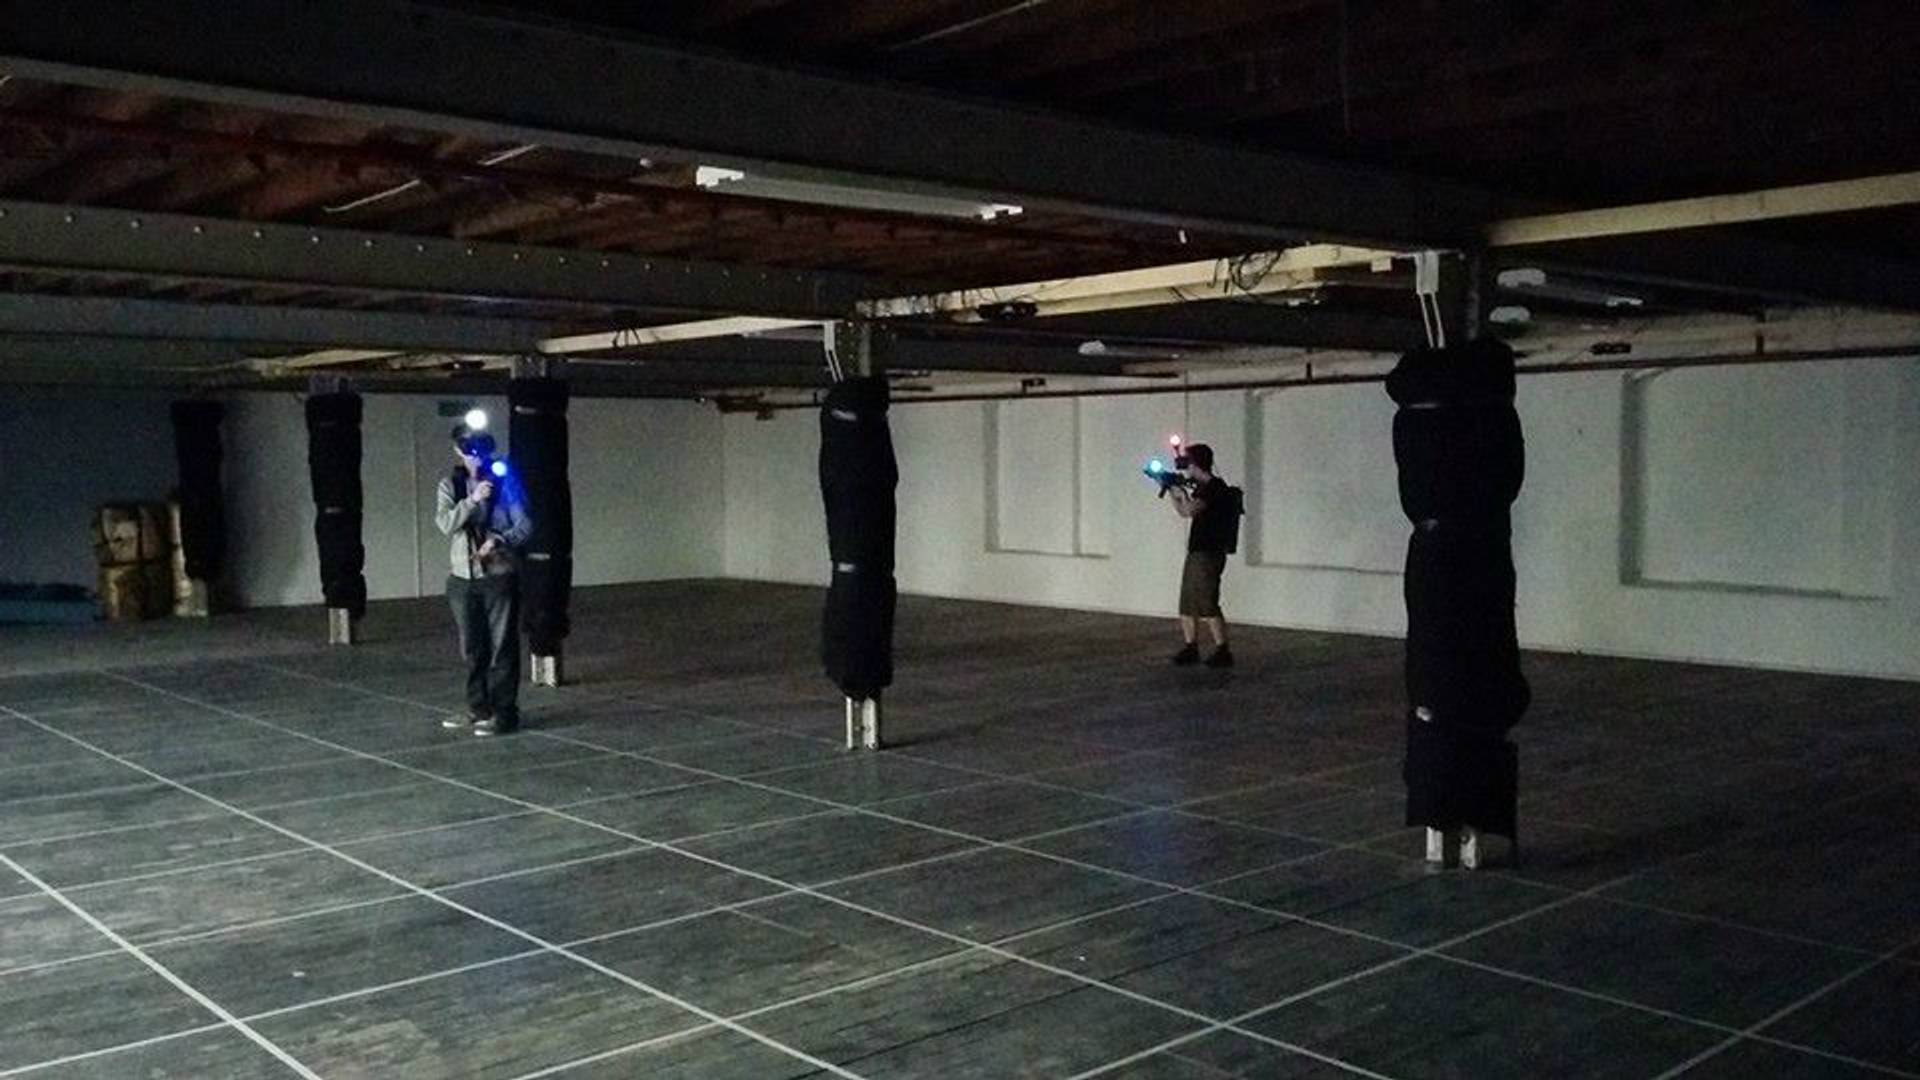 The world’s first VR entertainment facility